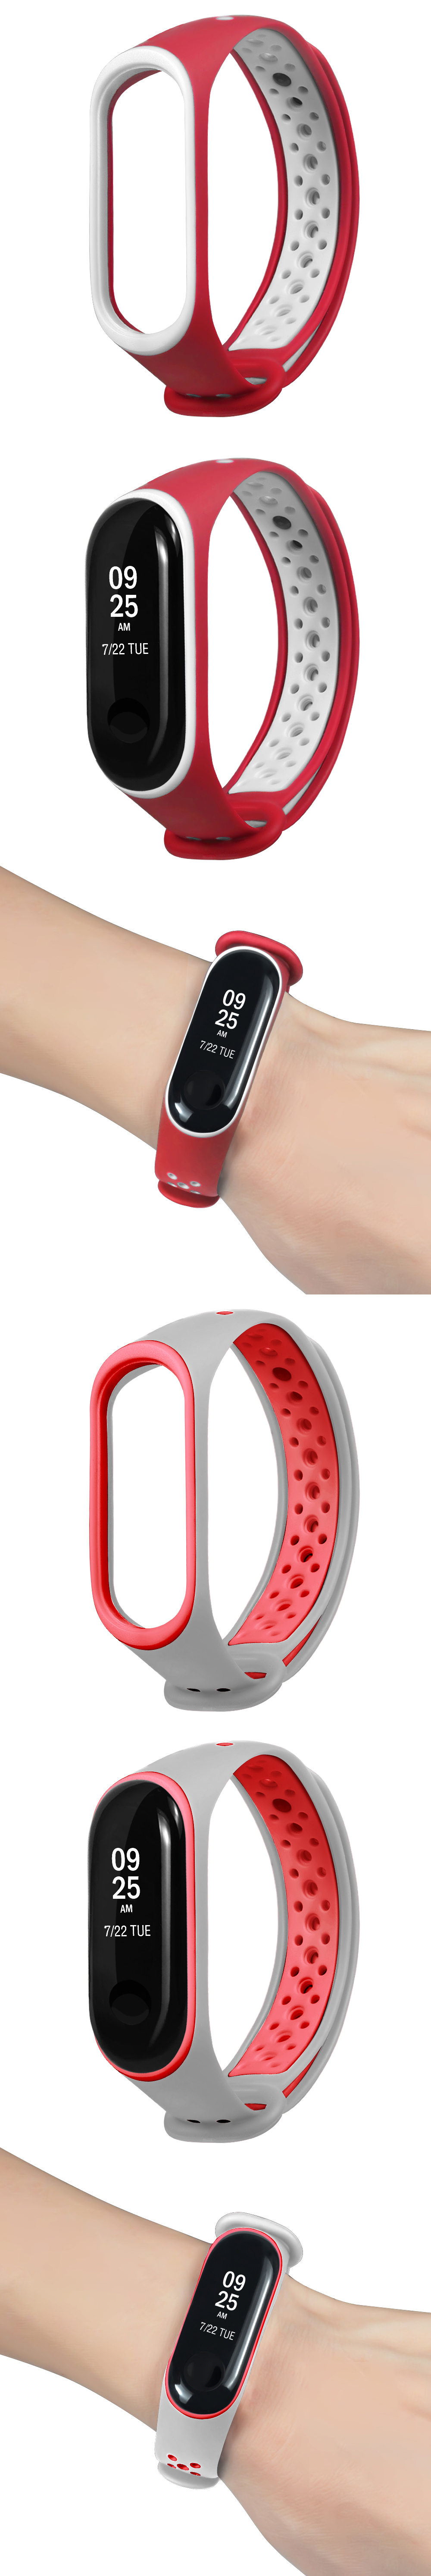 Bakeey-Double-Color-Silicone-Watch-Strap-Replacement-Smart-Watch-for-Xiaomi-Mi-Band-3-Non-original-1368816-3